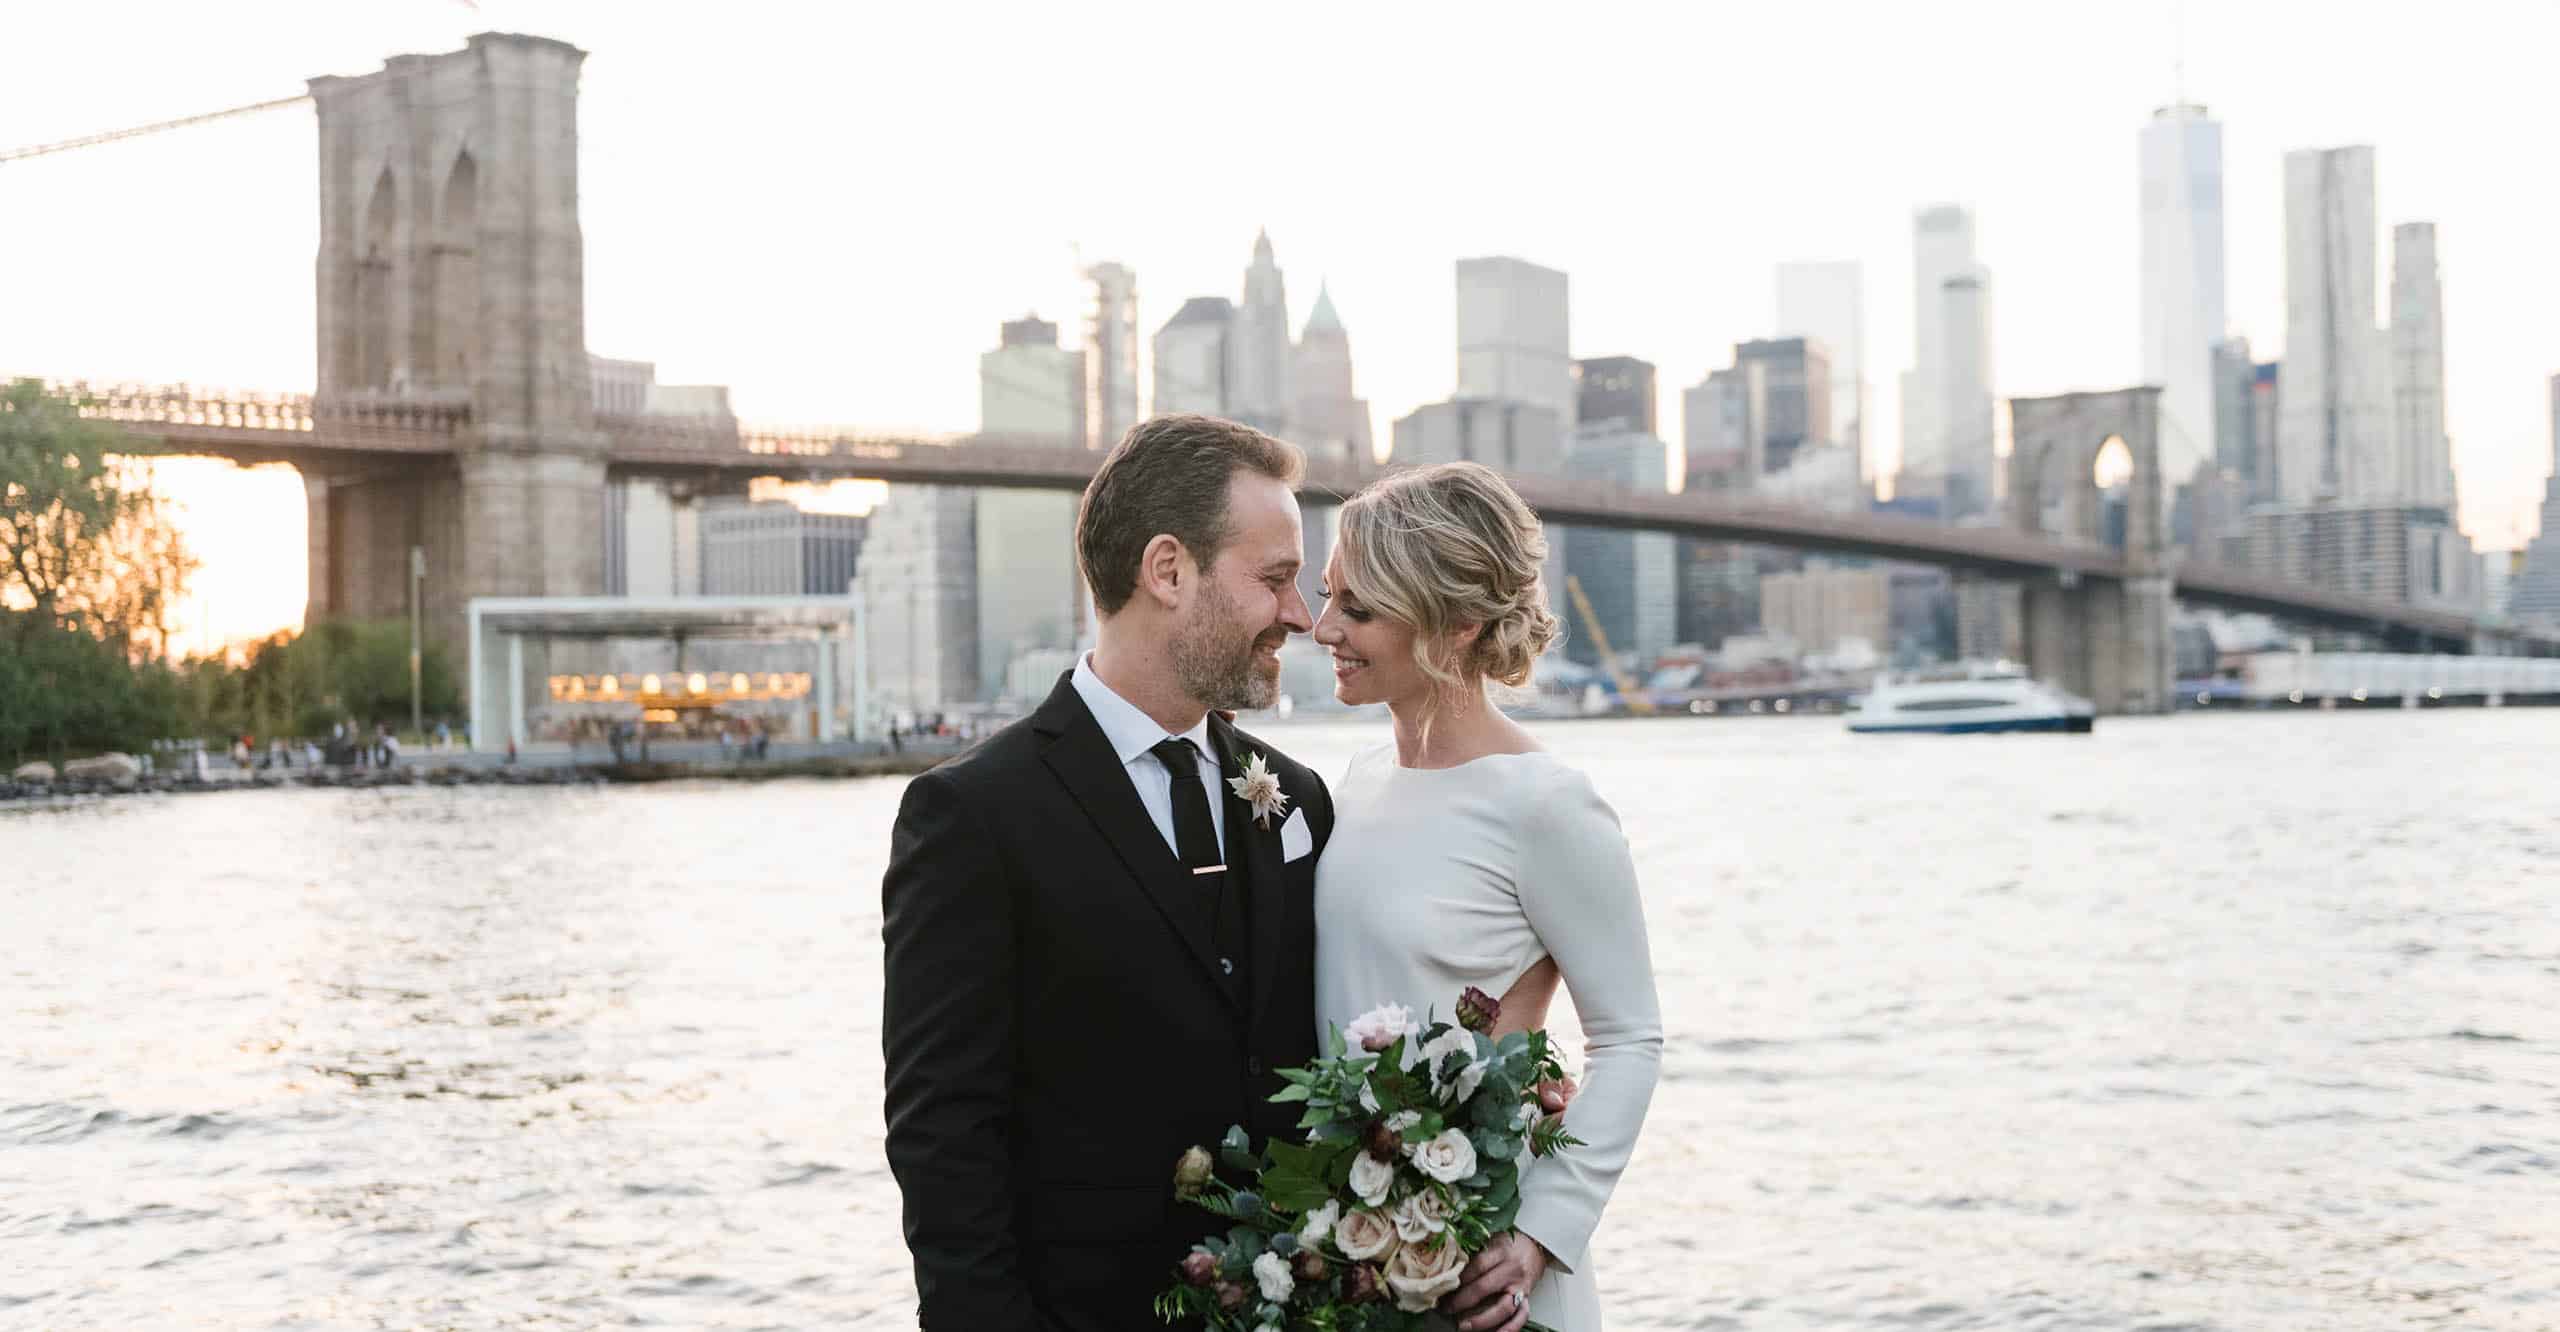 Best time to get married in New York: the Ideal Season and Month to have an NYC wedding